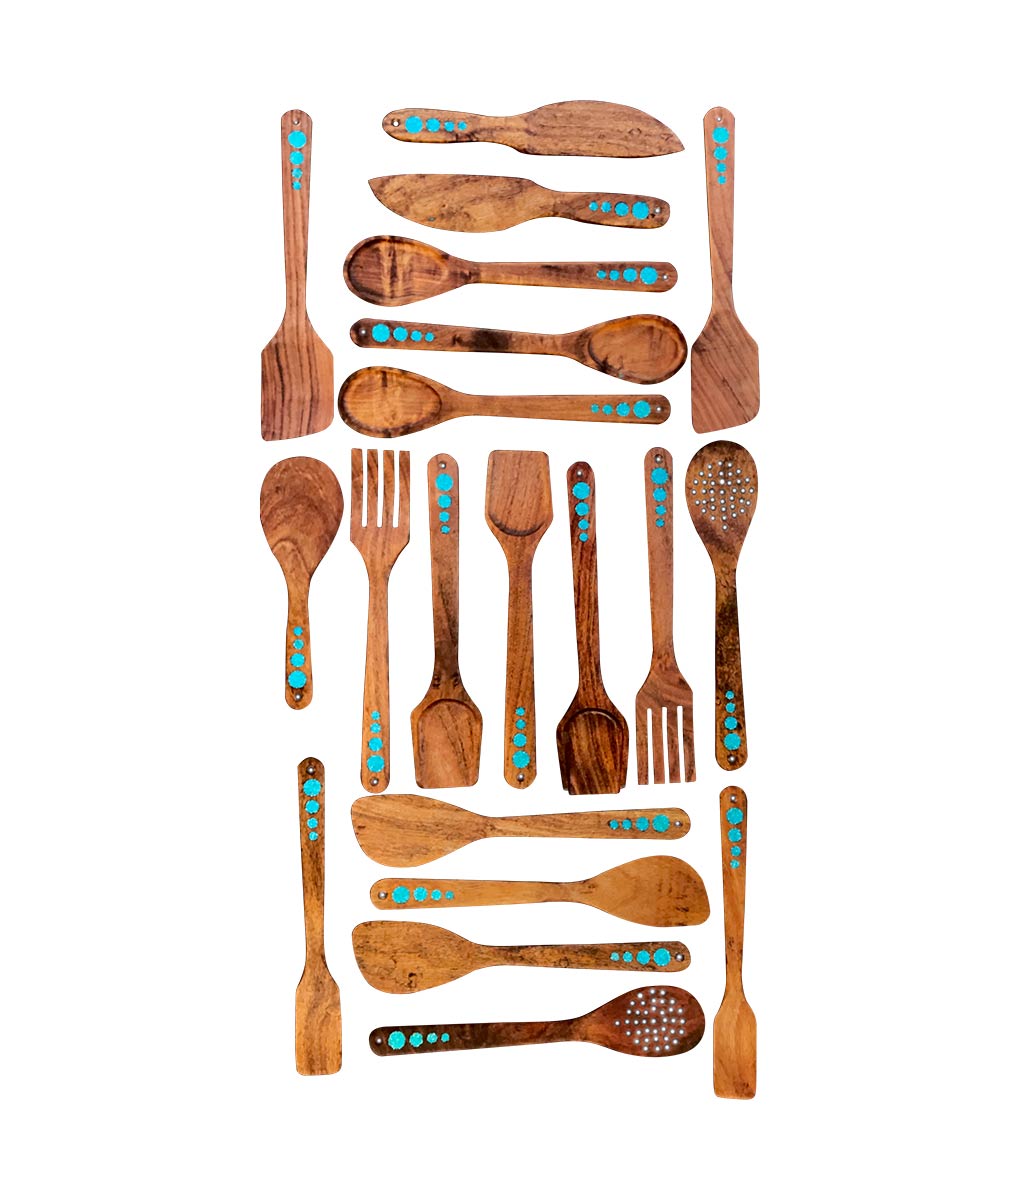 https://rusticartistry.com/wp-content/uploads/2018/11/Wood-cooking-utensils-with-turquoise-inlay-group-Recovered.jpg